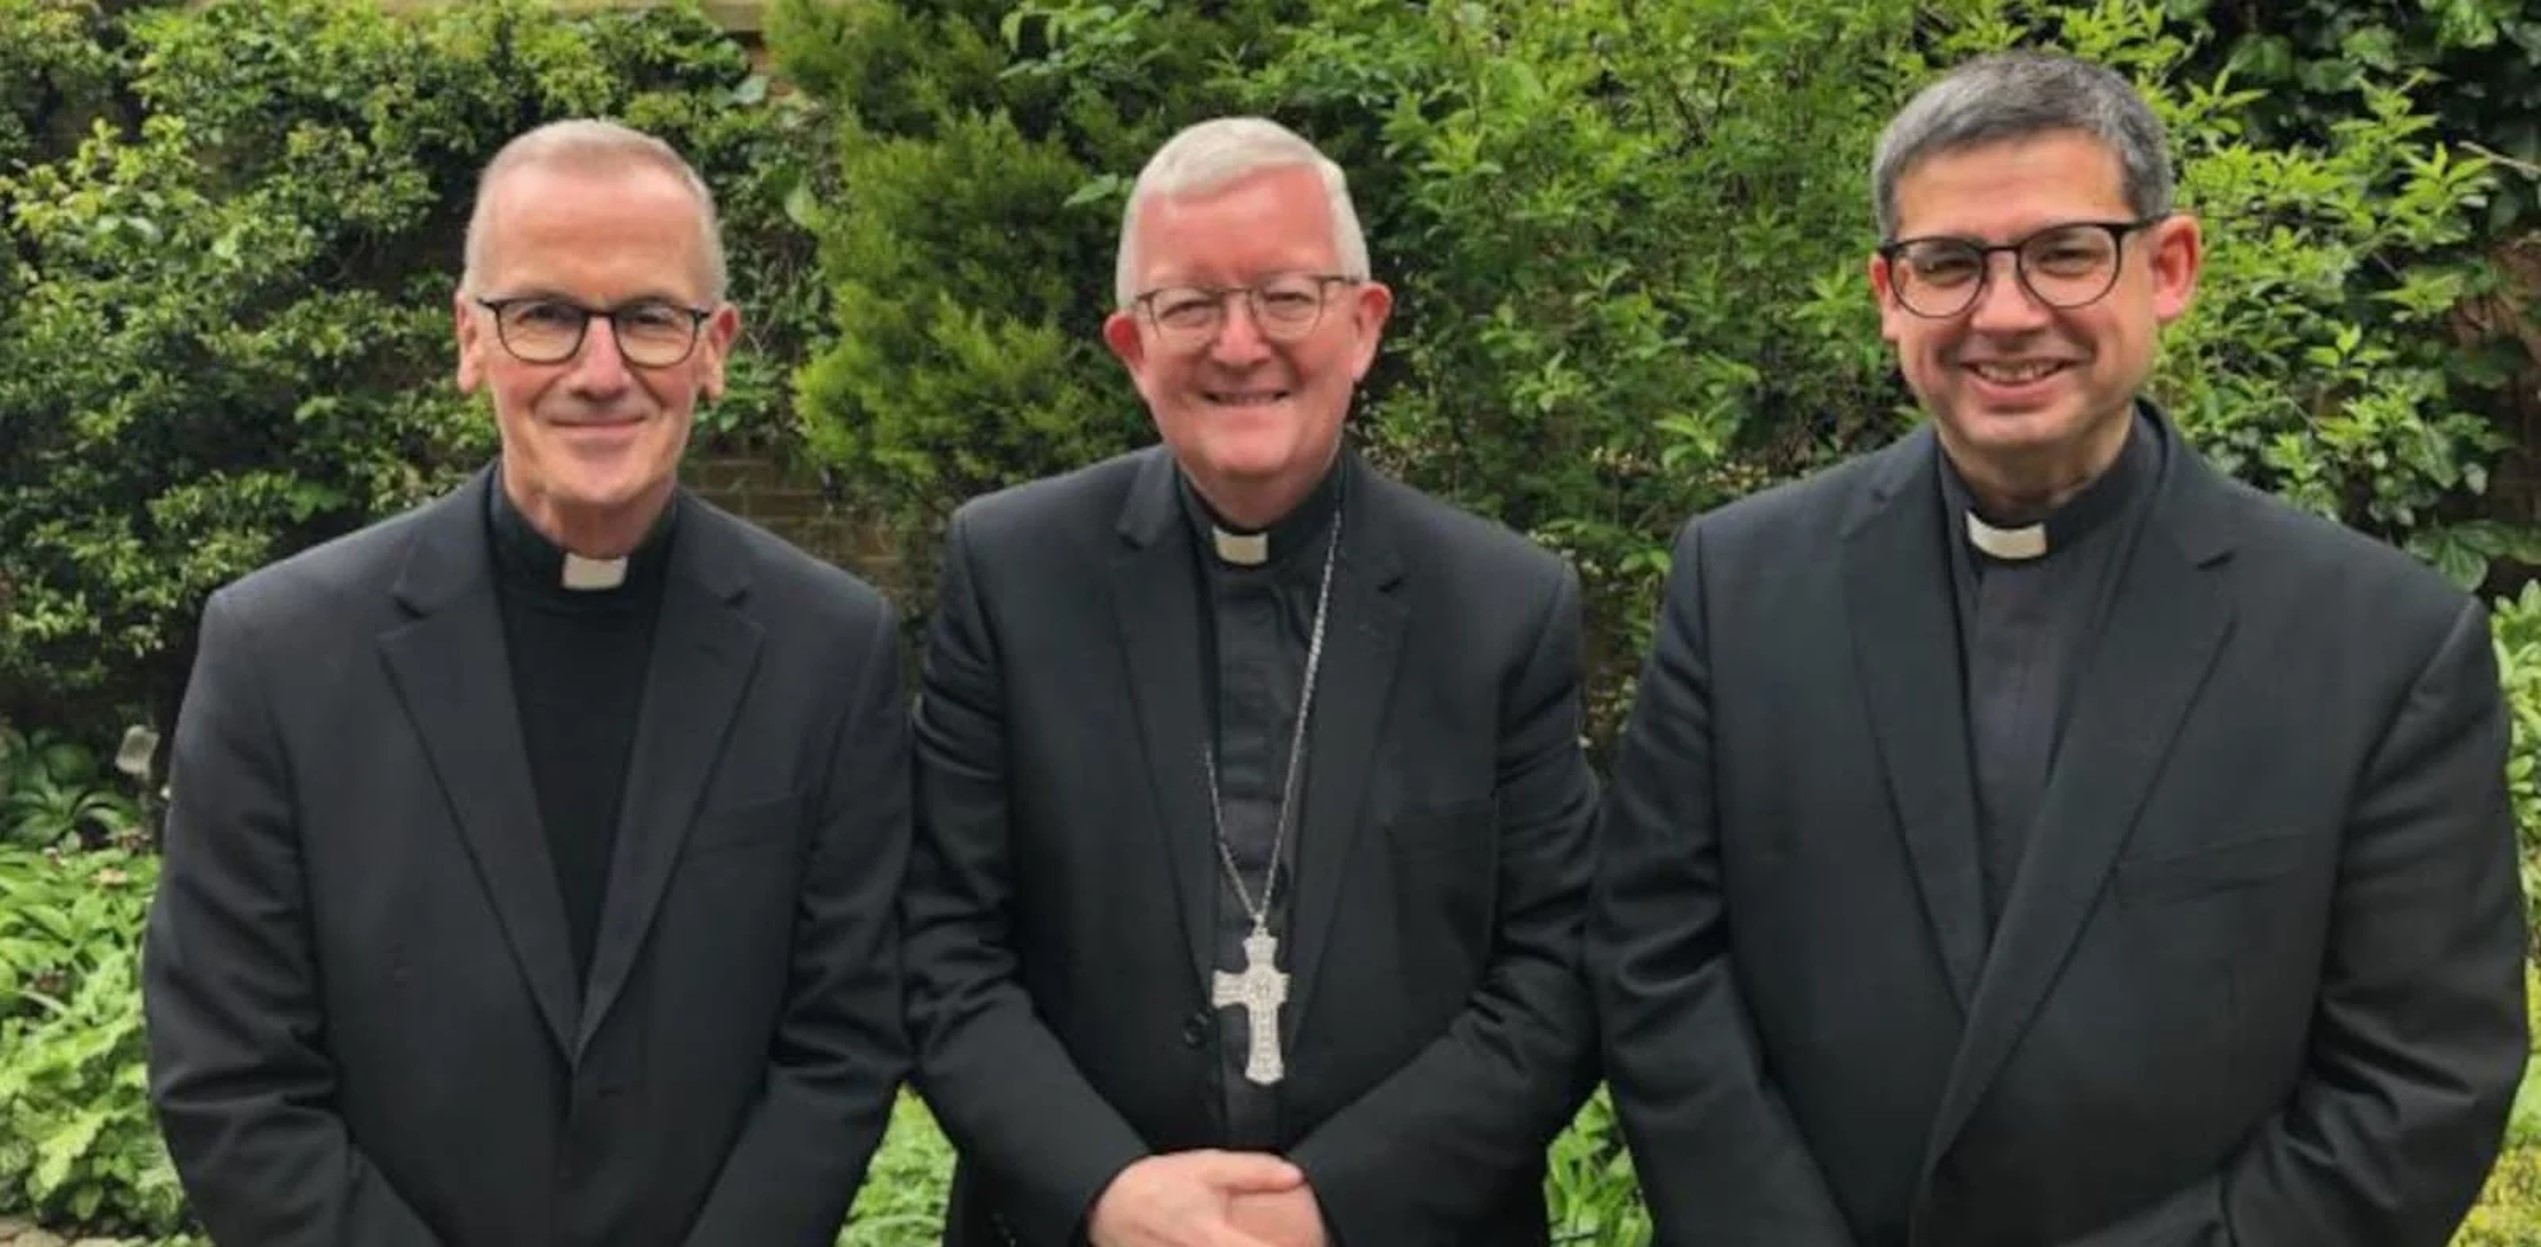 Birmingham auxiliary bishops appointed